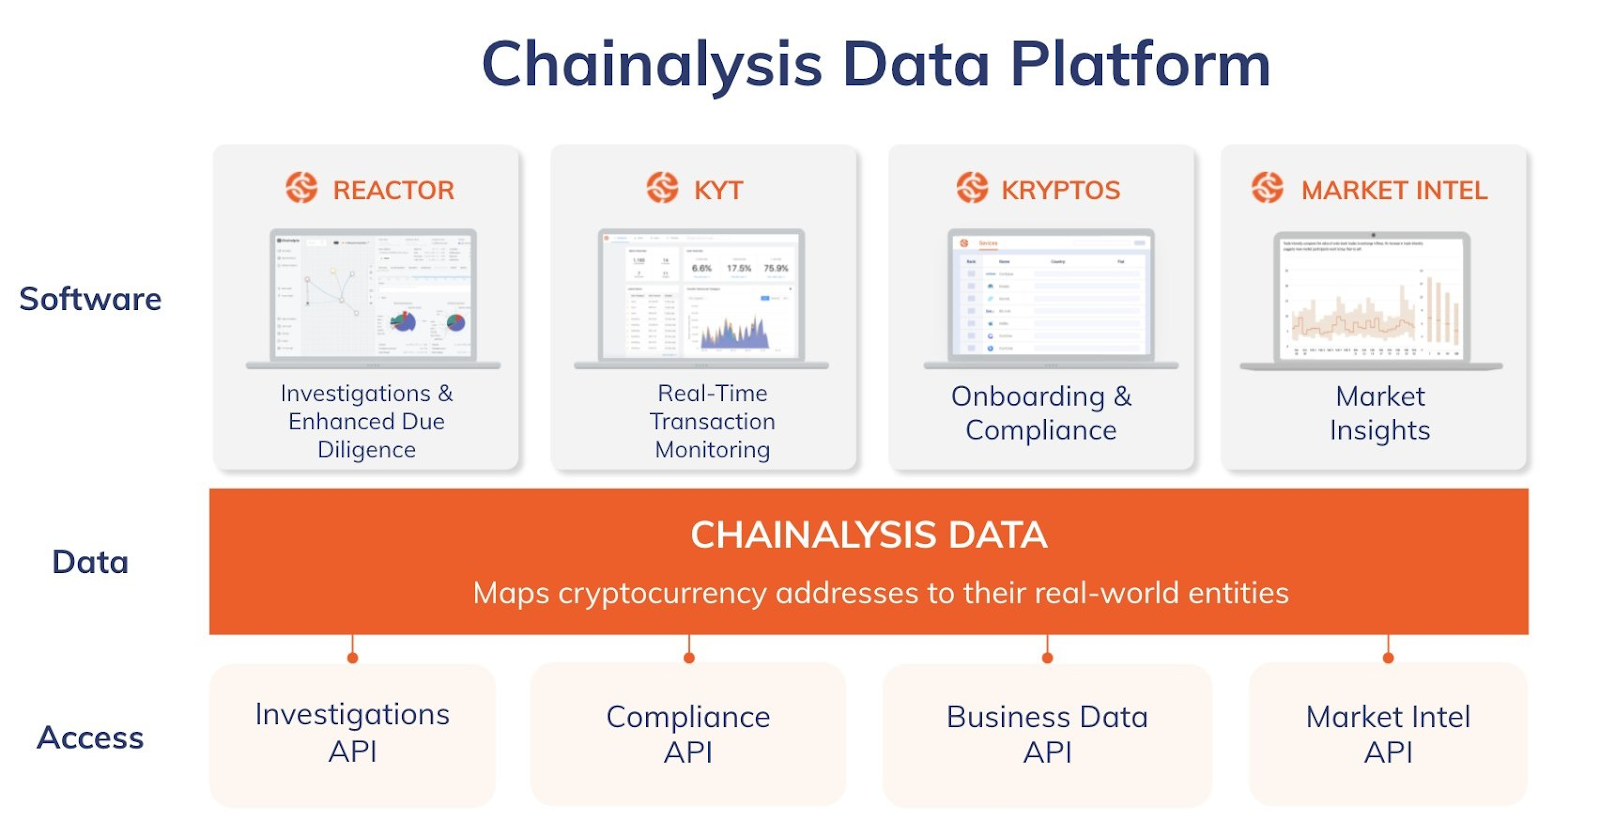 The Chainalysis data platform contains numerous products, including Reactor, KYT, Kryptos, and Market Intel.